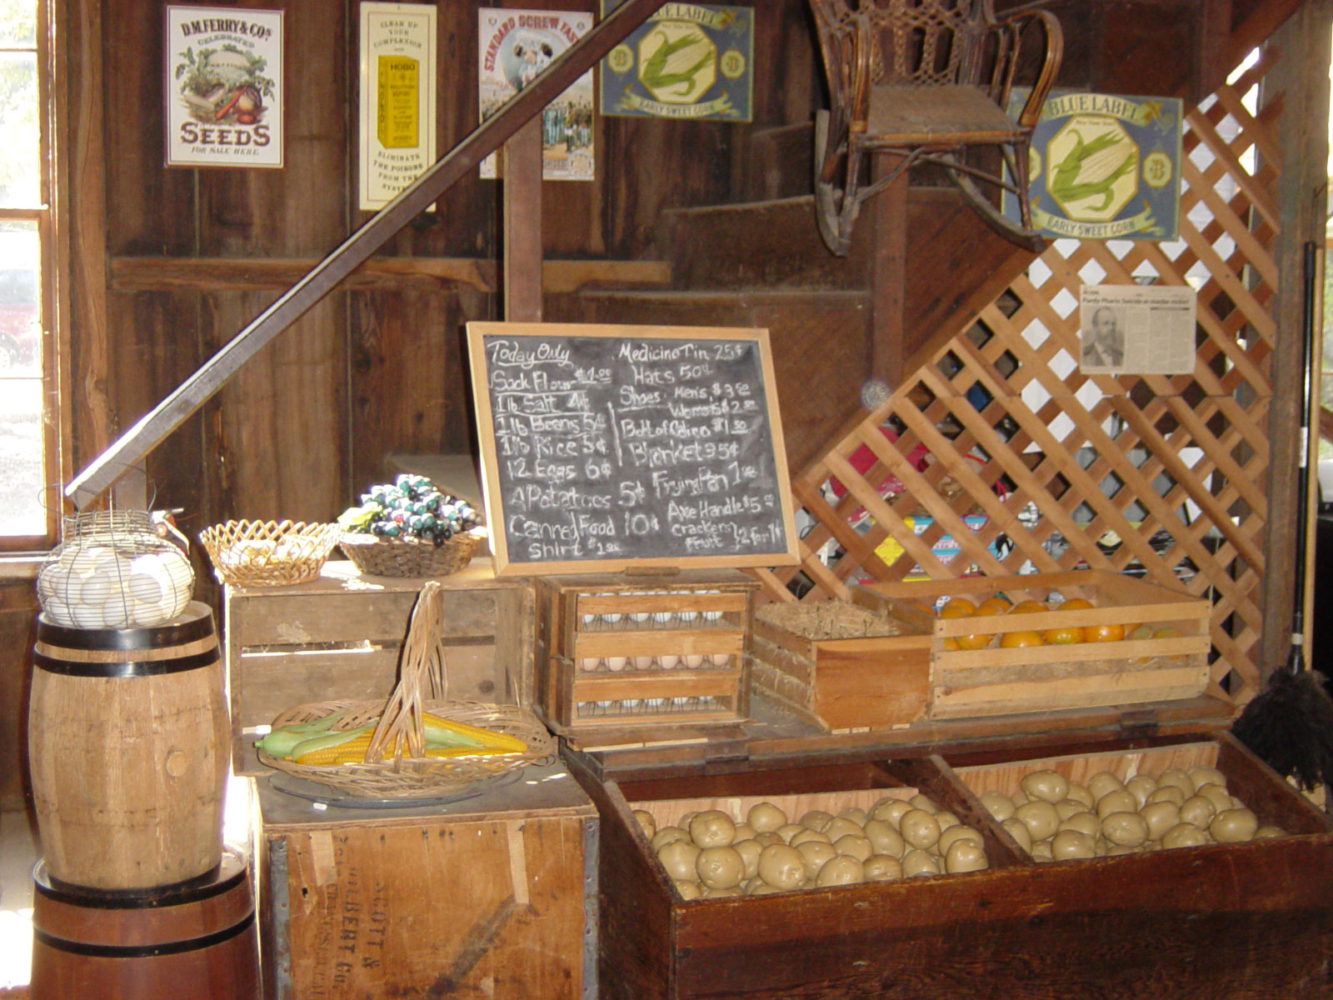 A display of dry goods at the Woodside Store